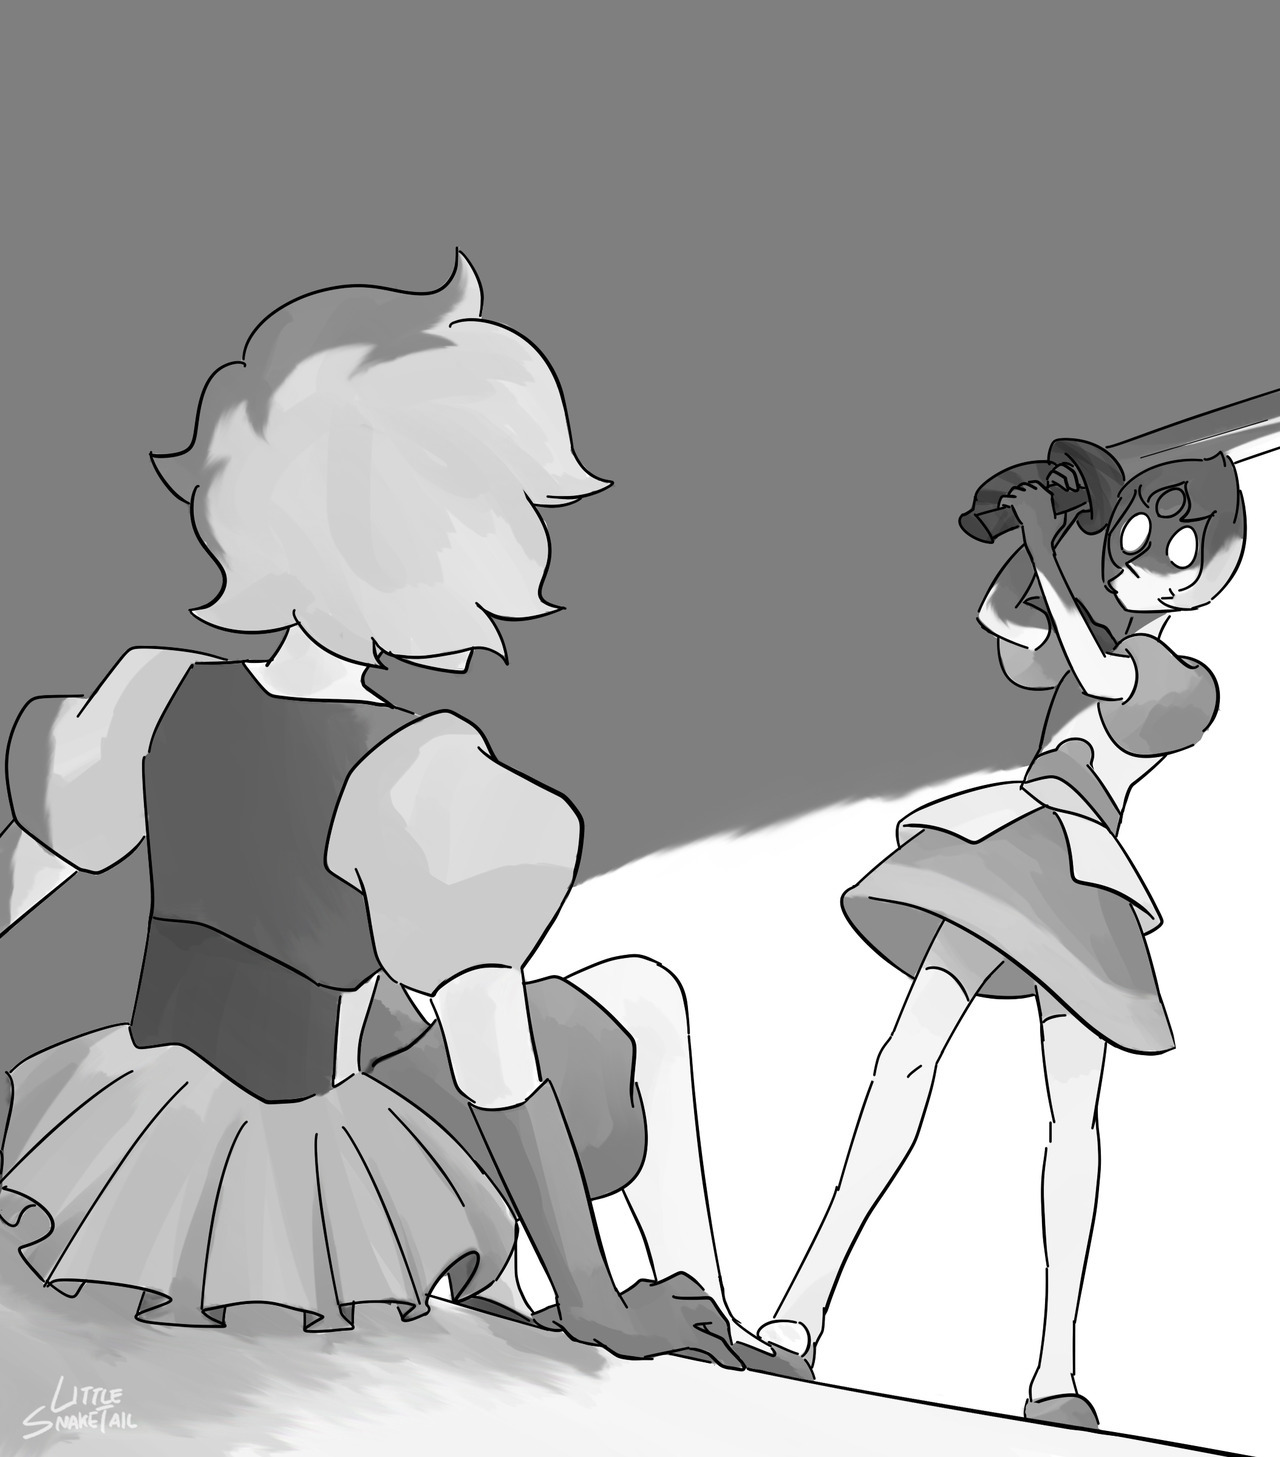 “P…Pearl?” —- I’m not jumping to conclusions (Pearl may as well be taking out that sword just to polish it or mow the lawn or something), but it’s still a fun idea and was interesting to draw. Now...